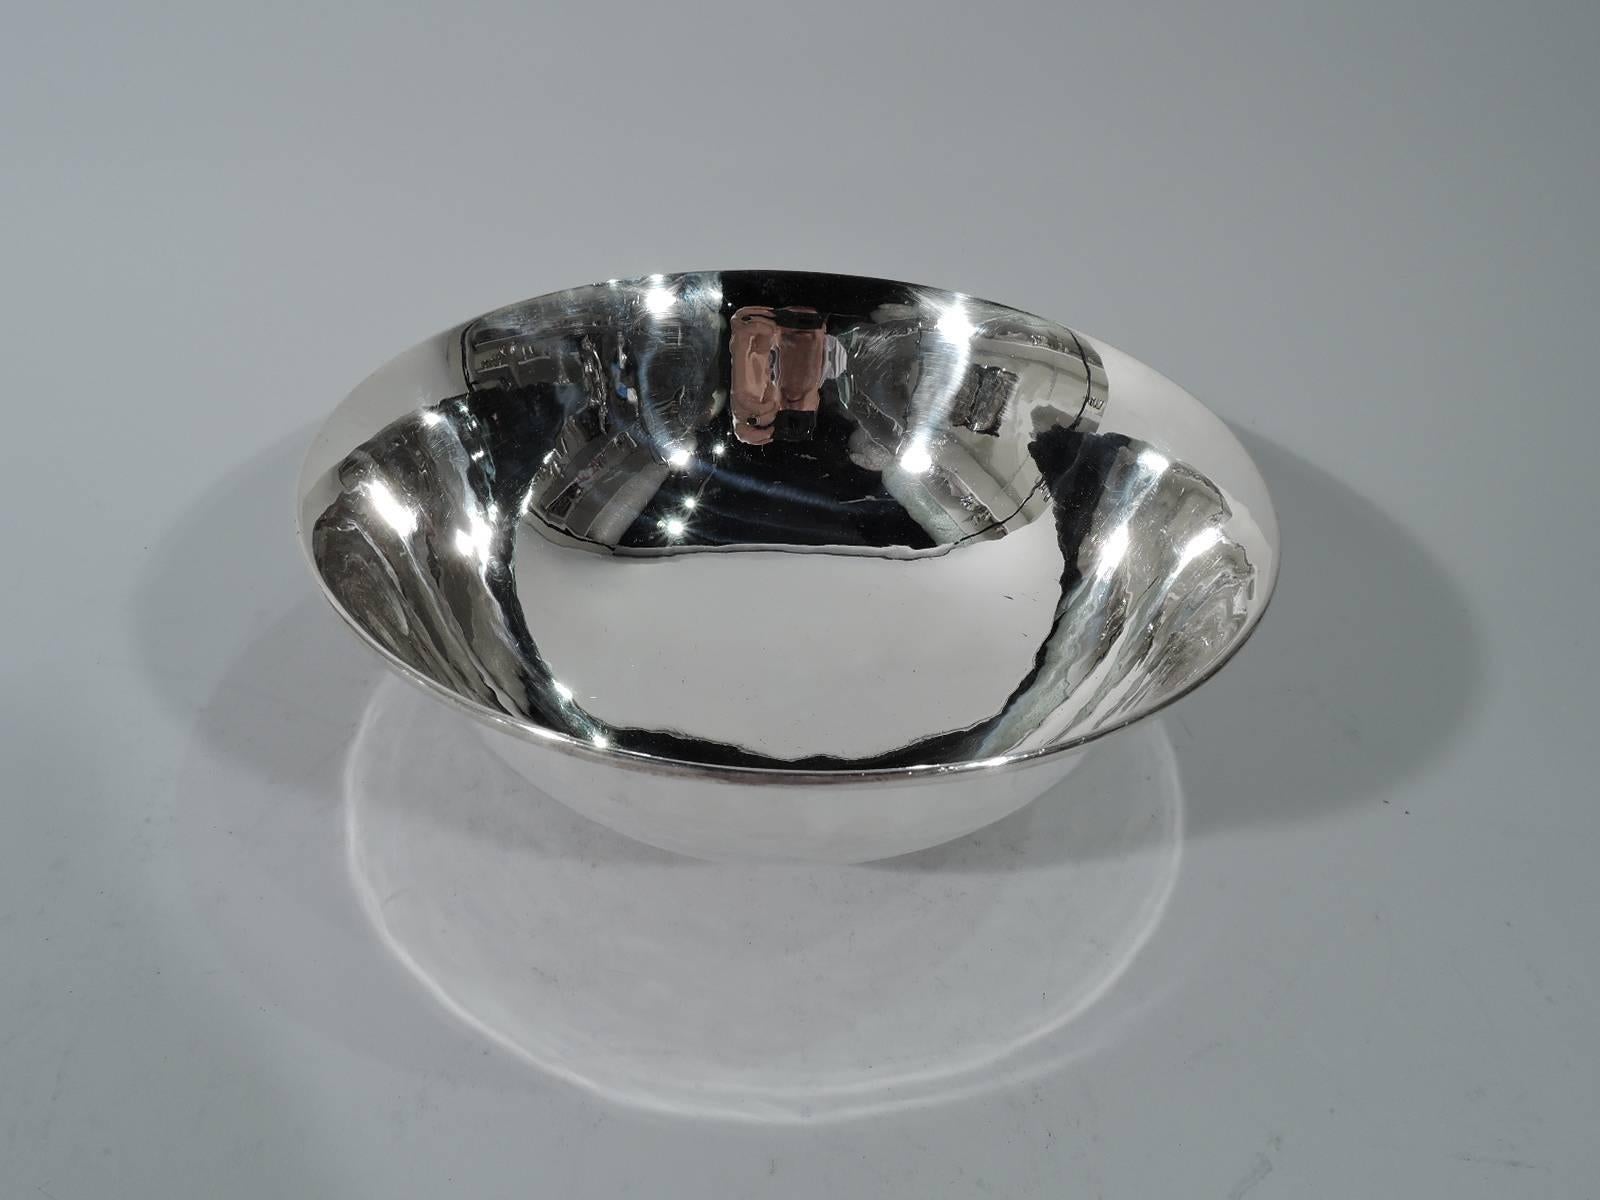 Handmade sterling silver bowl. Made by Arthur Stone in Gardner, mass. Curved and tapering sides and stepped foot. A beautiful piece in the craftsman tradition. Hallmark includes bench man’s initial G for Herman W. Glendenning, who was active from